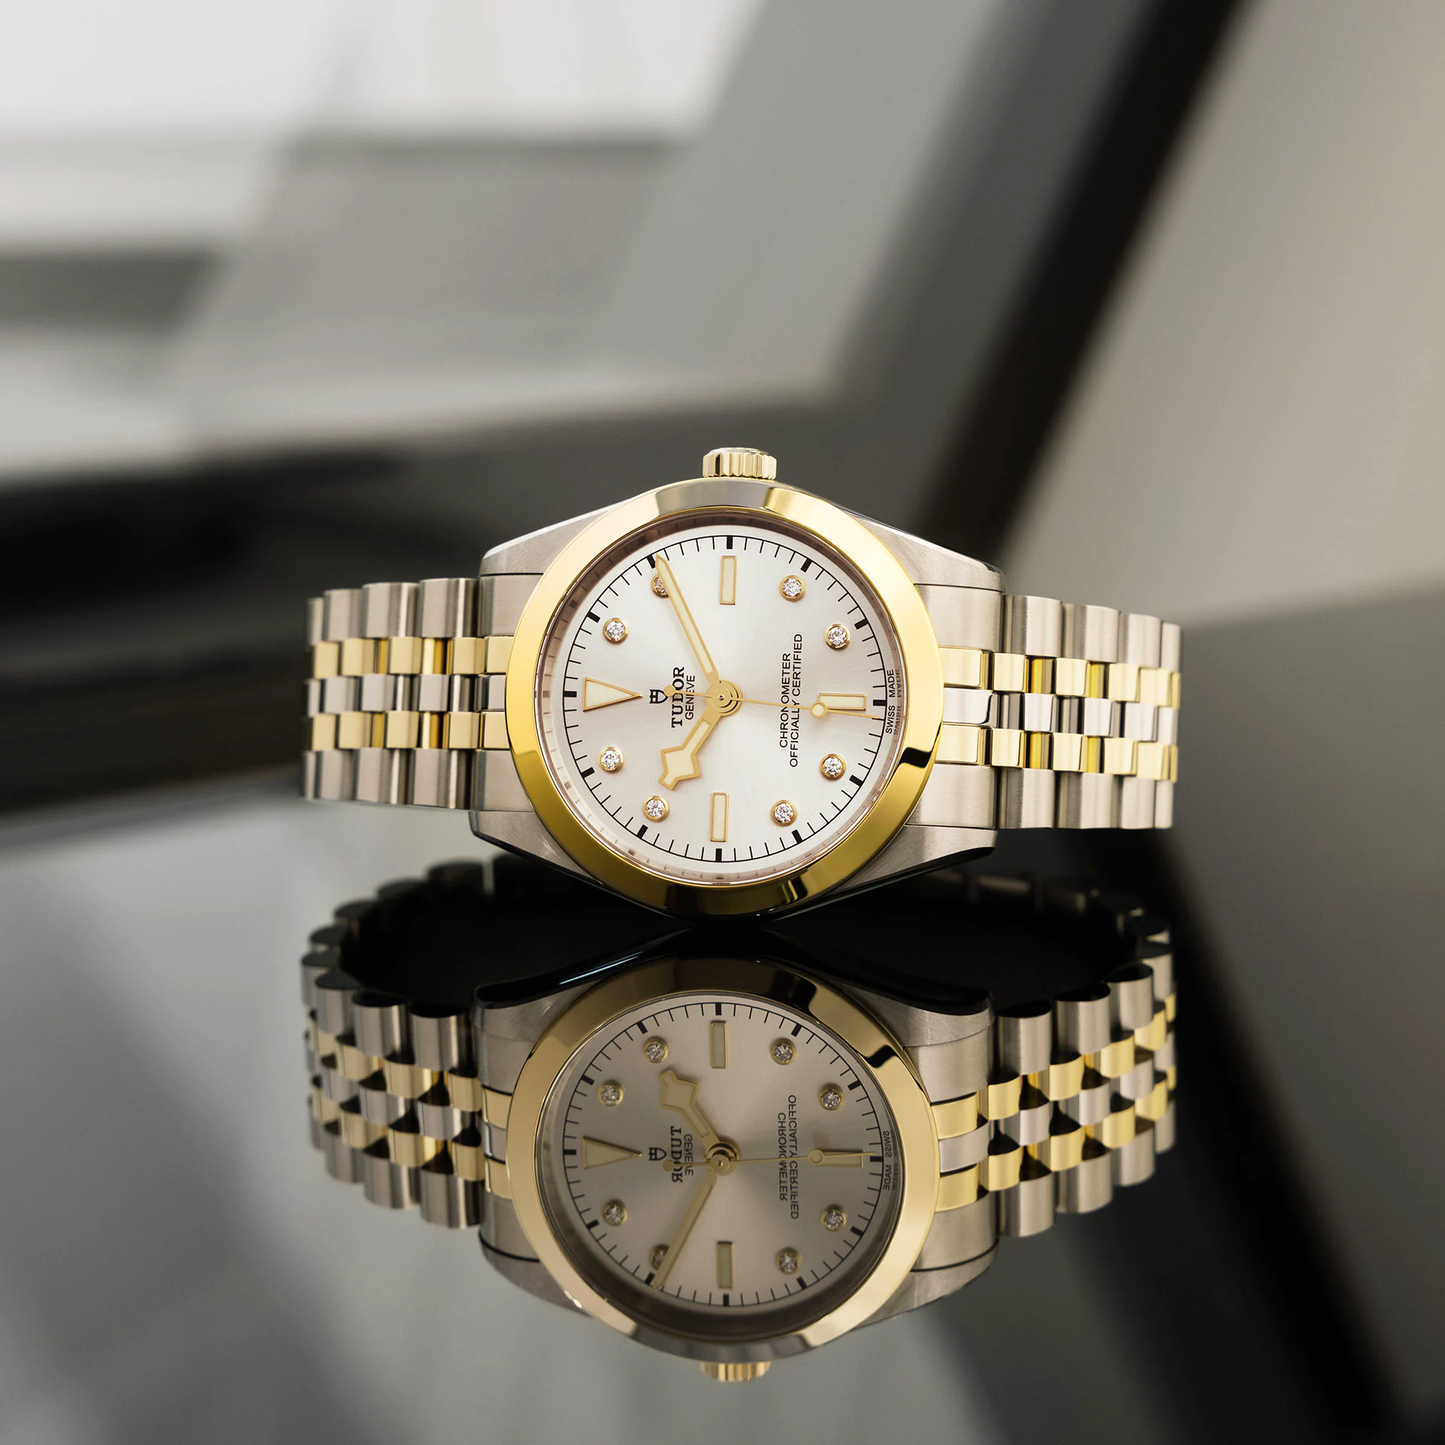 Tudor Black Bay 39 S&G, 316L Stainless Steel and 18k Yellow Gold, Ref# M79663-0007, Main view